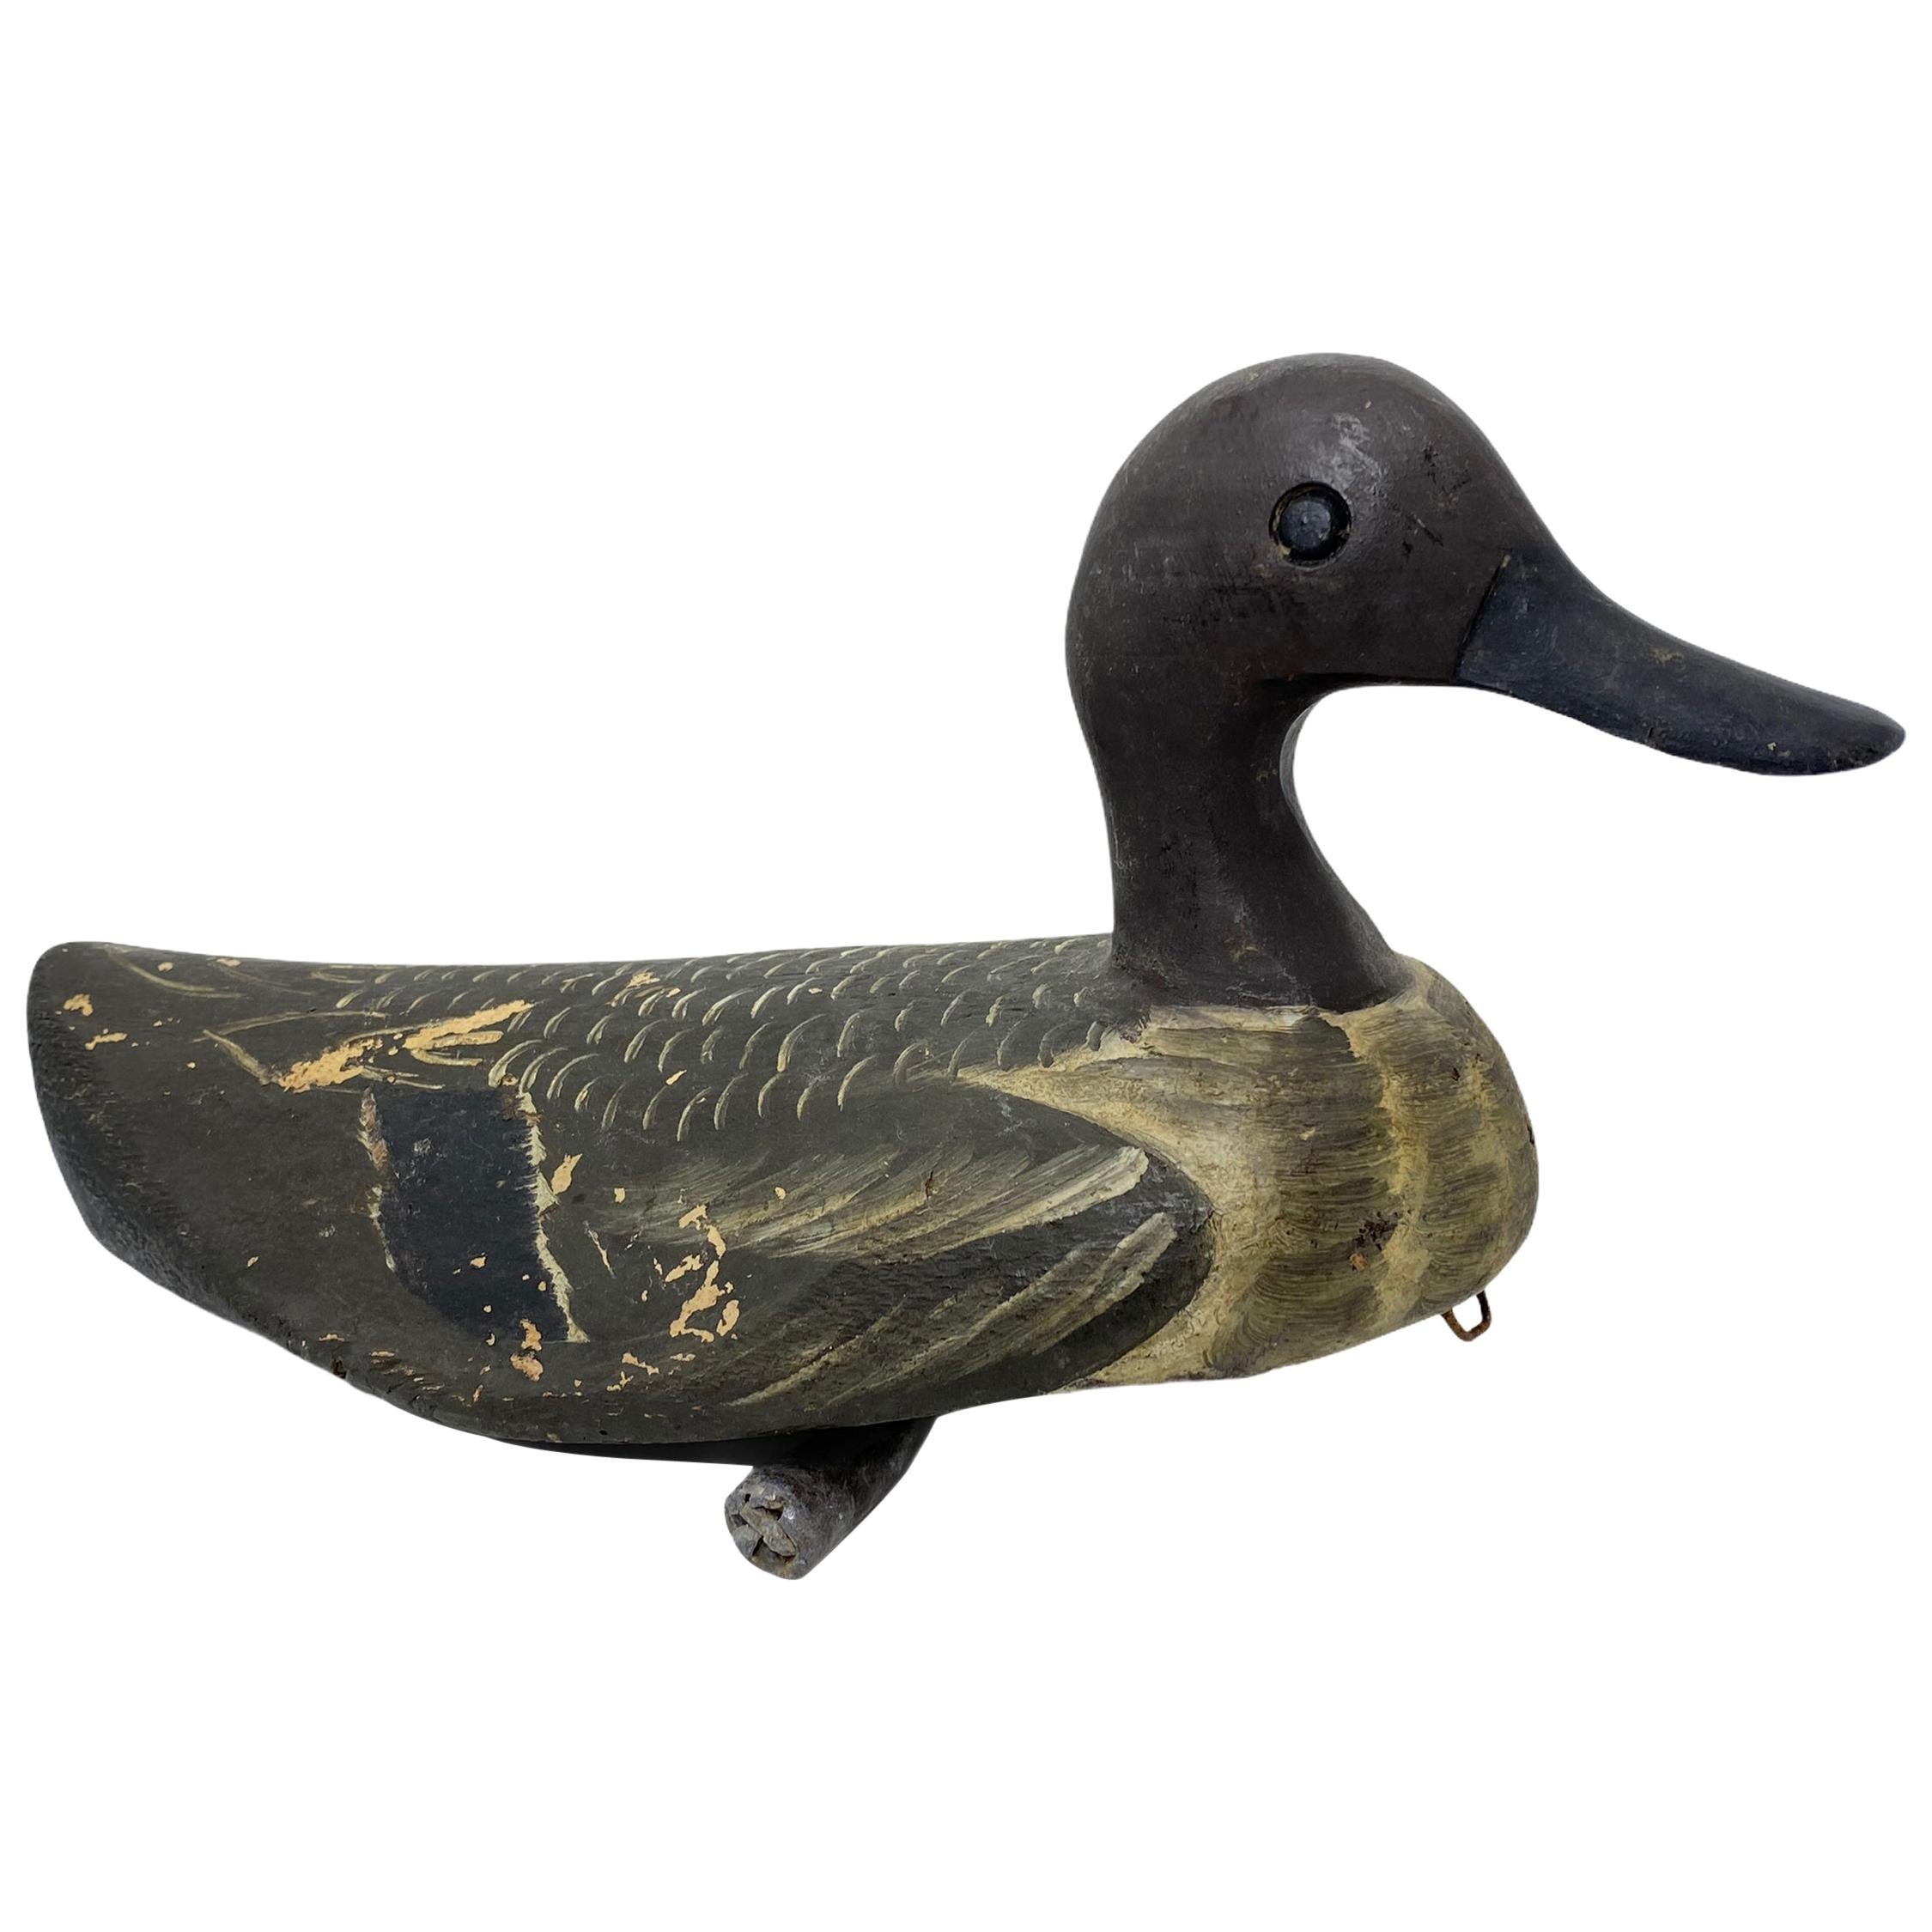 Early 20th Century Hand Painted Duck Decoy Antique German